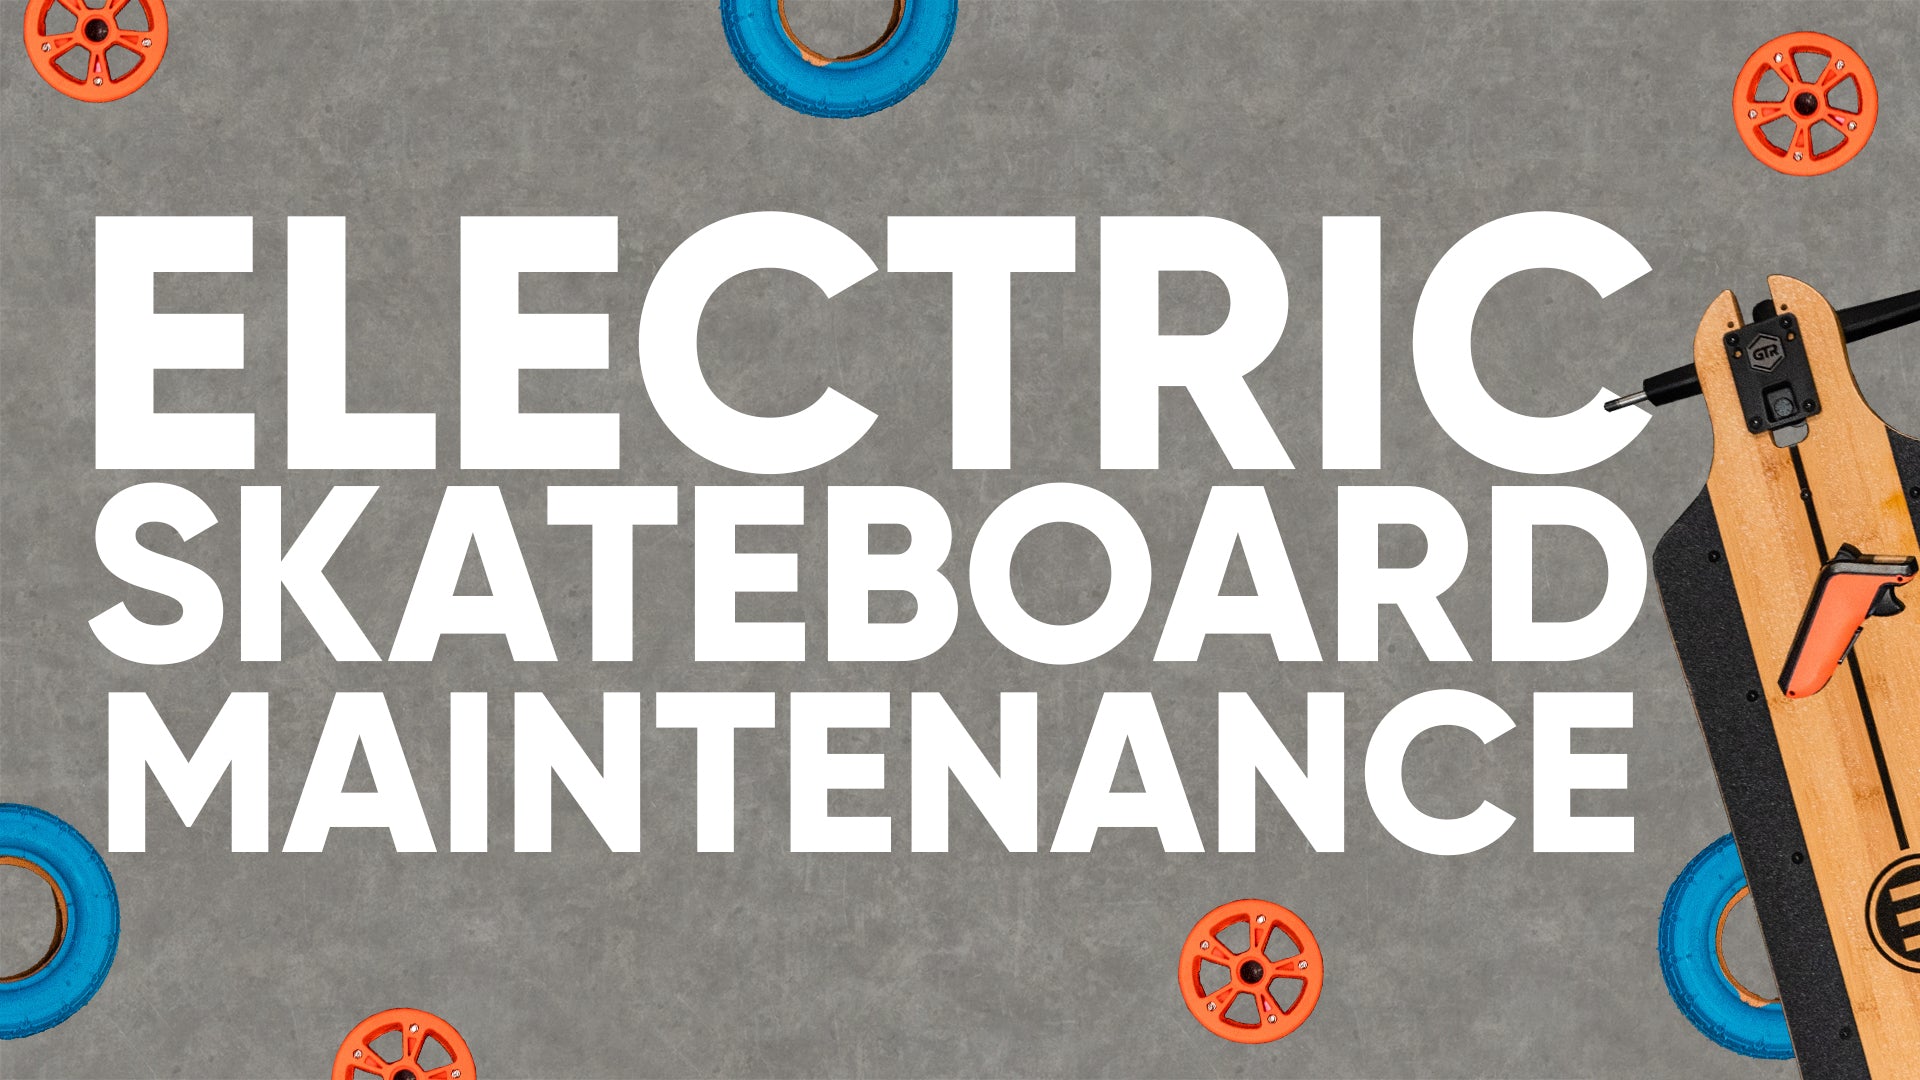 Electric Skateboard Maintenance: How to Tension Belts and Change Tires